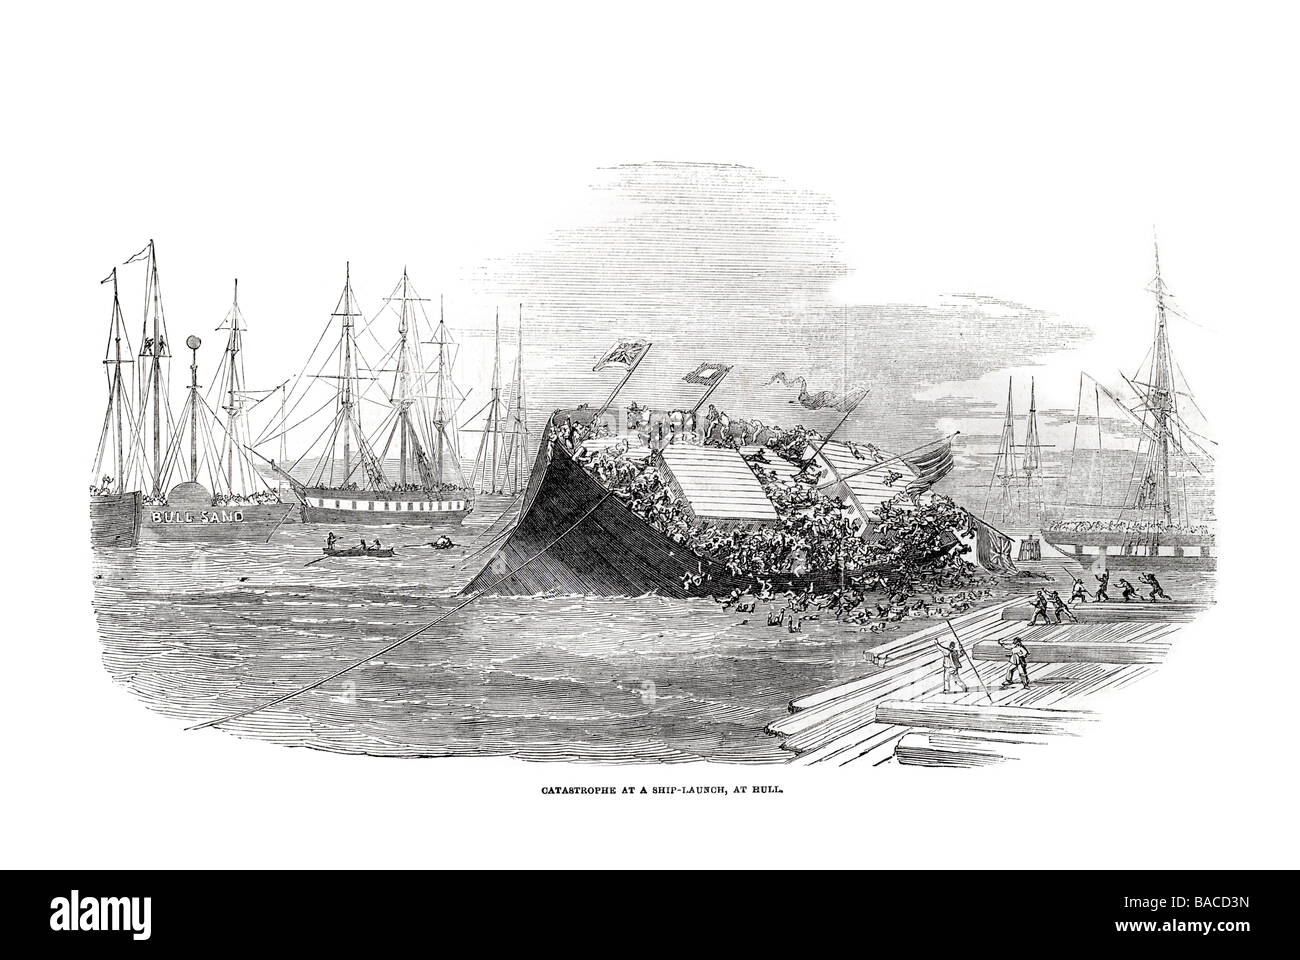 catastrophe at ship launch at hull docks harbour River Humber foreign trading port 1854 Stock Photo